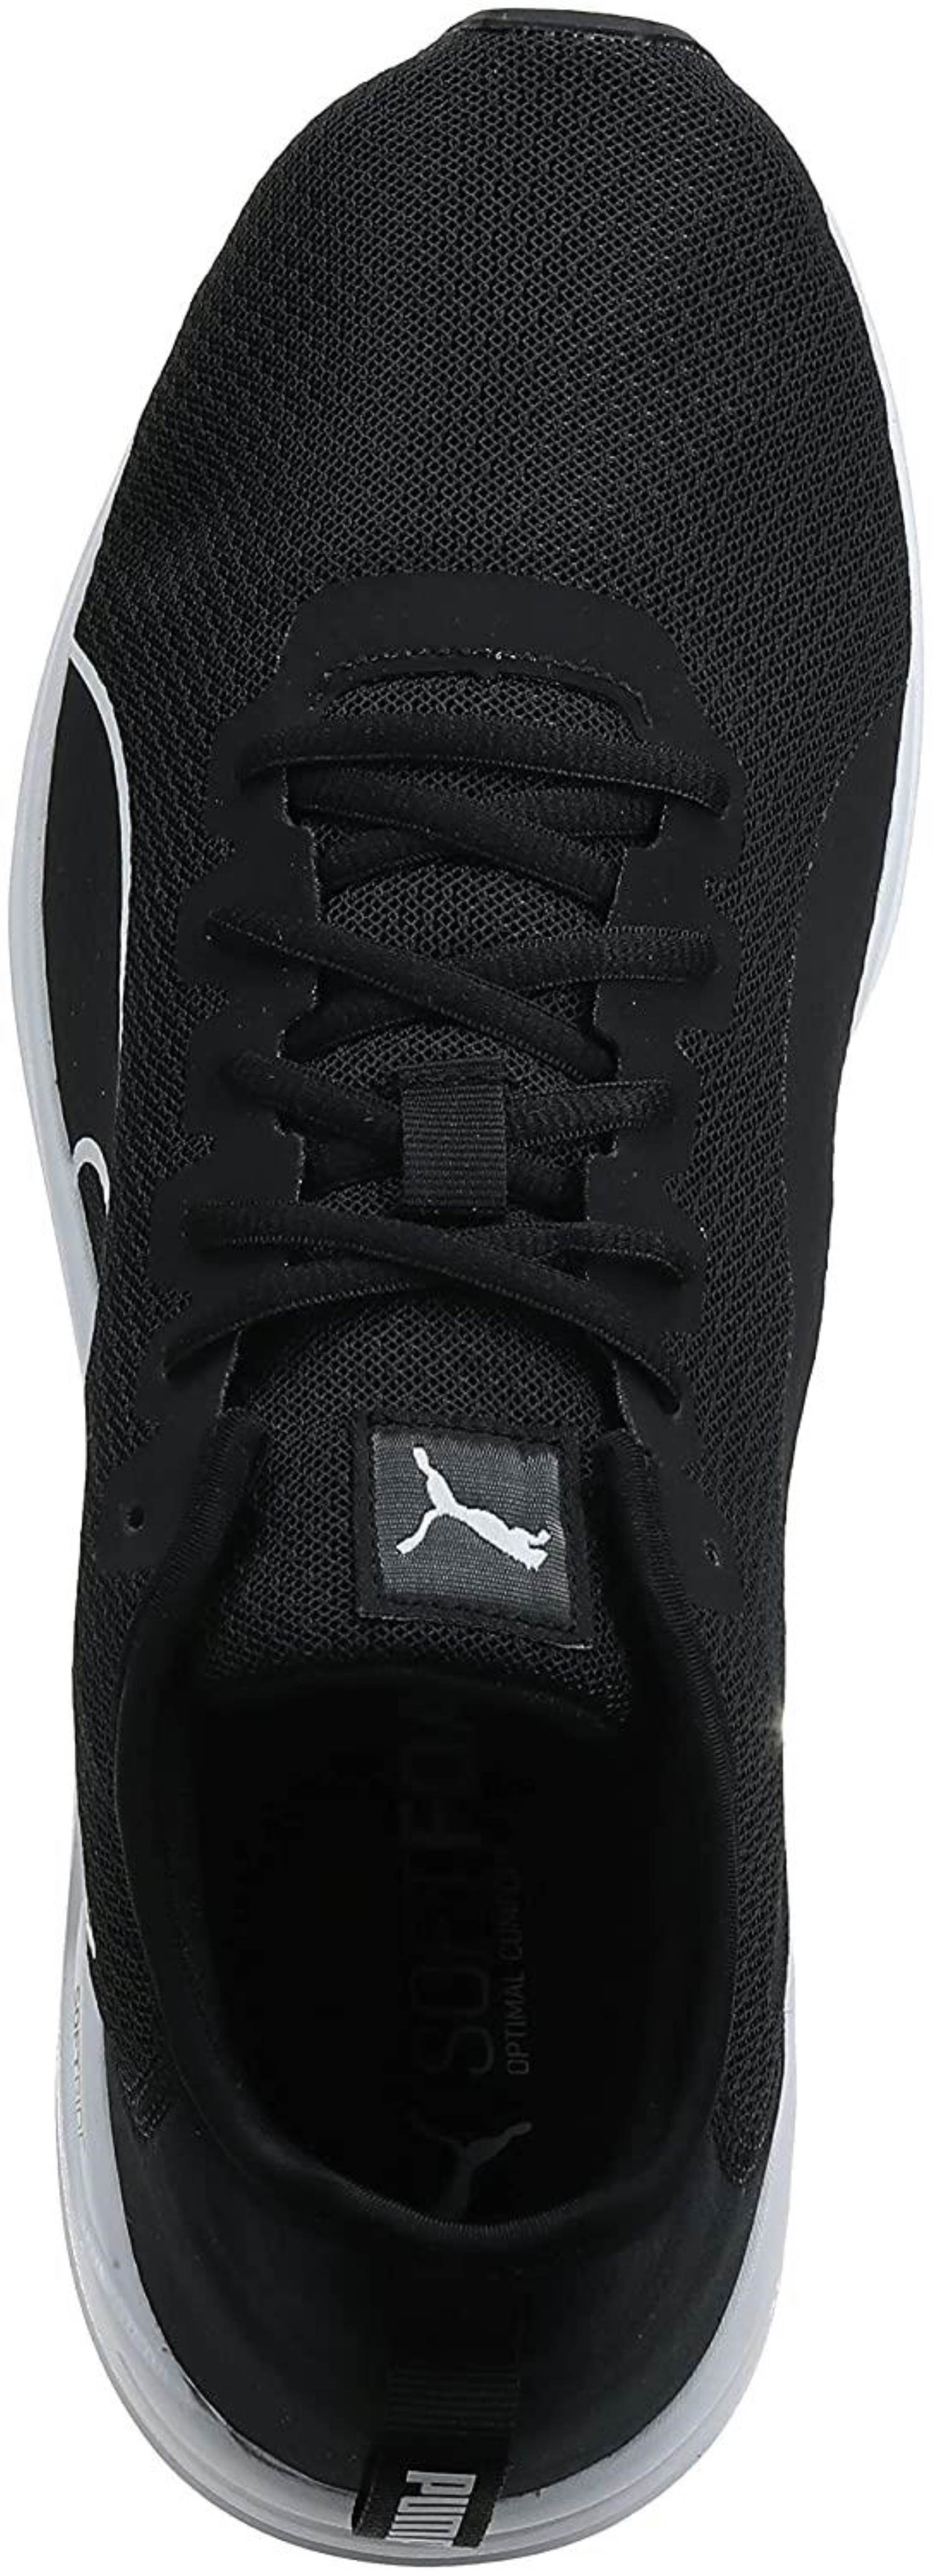 Puma Brand Mens Accent Laced Running Sports Shoes 195515 01 (Black ...